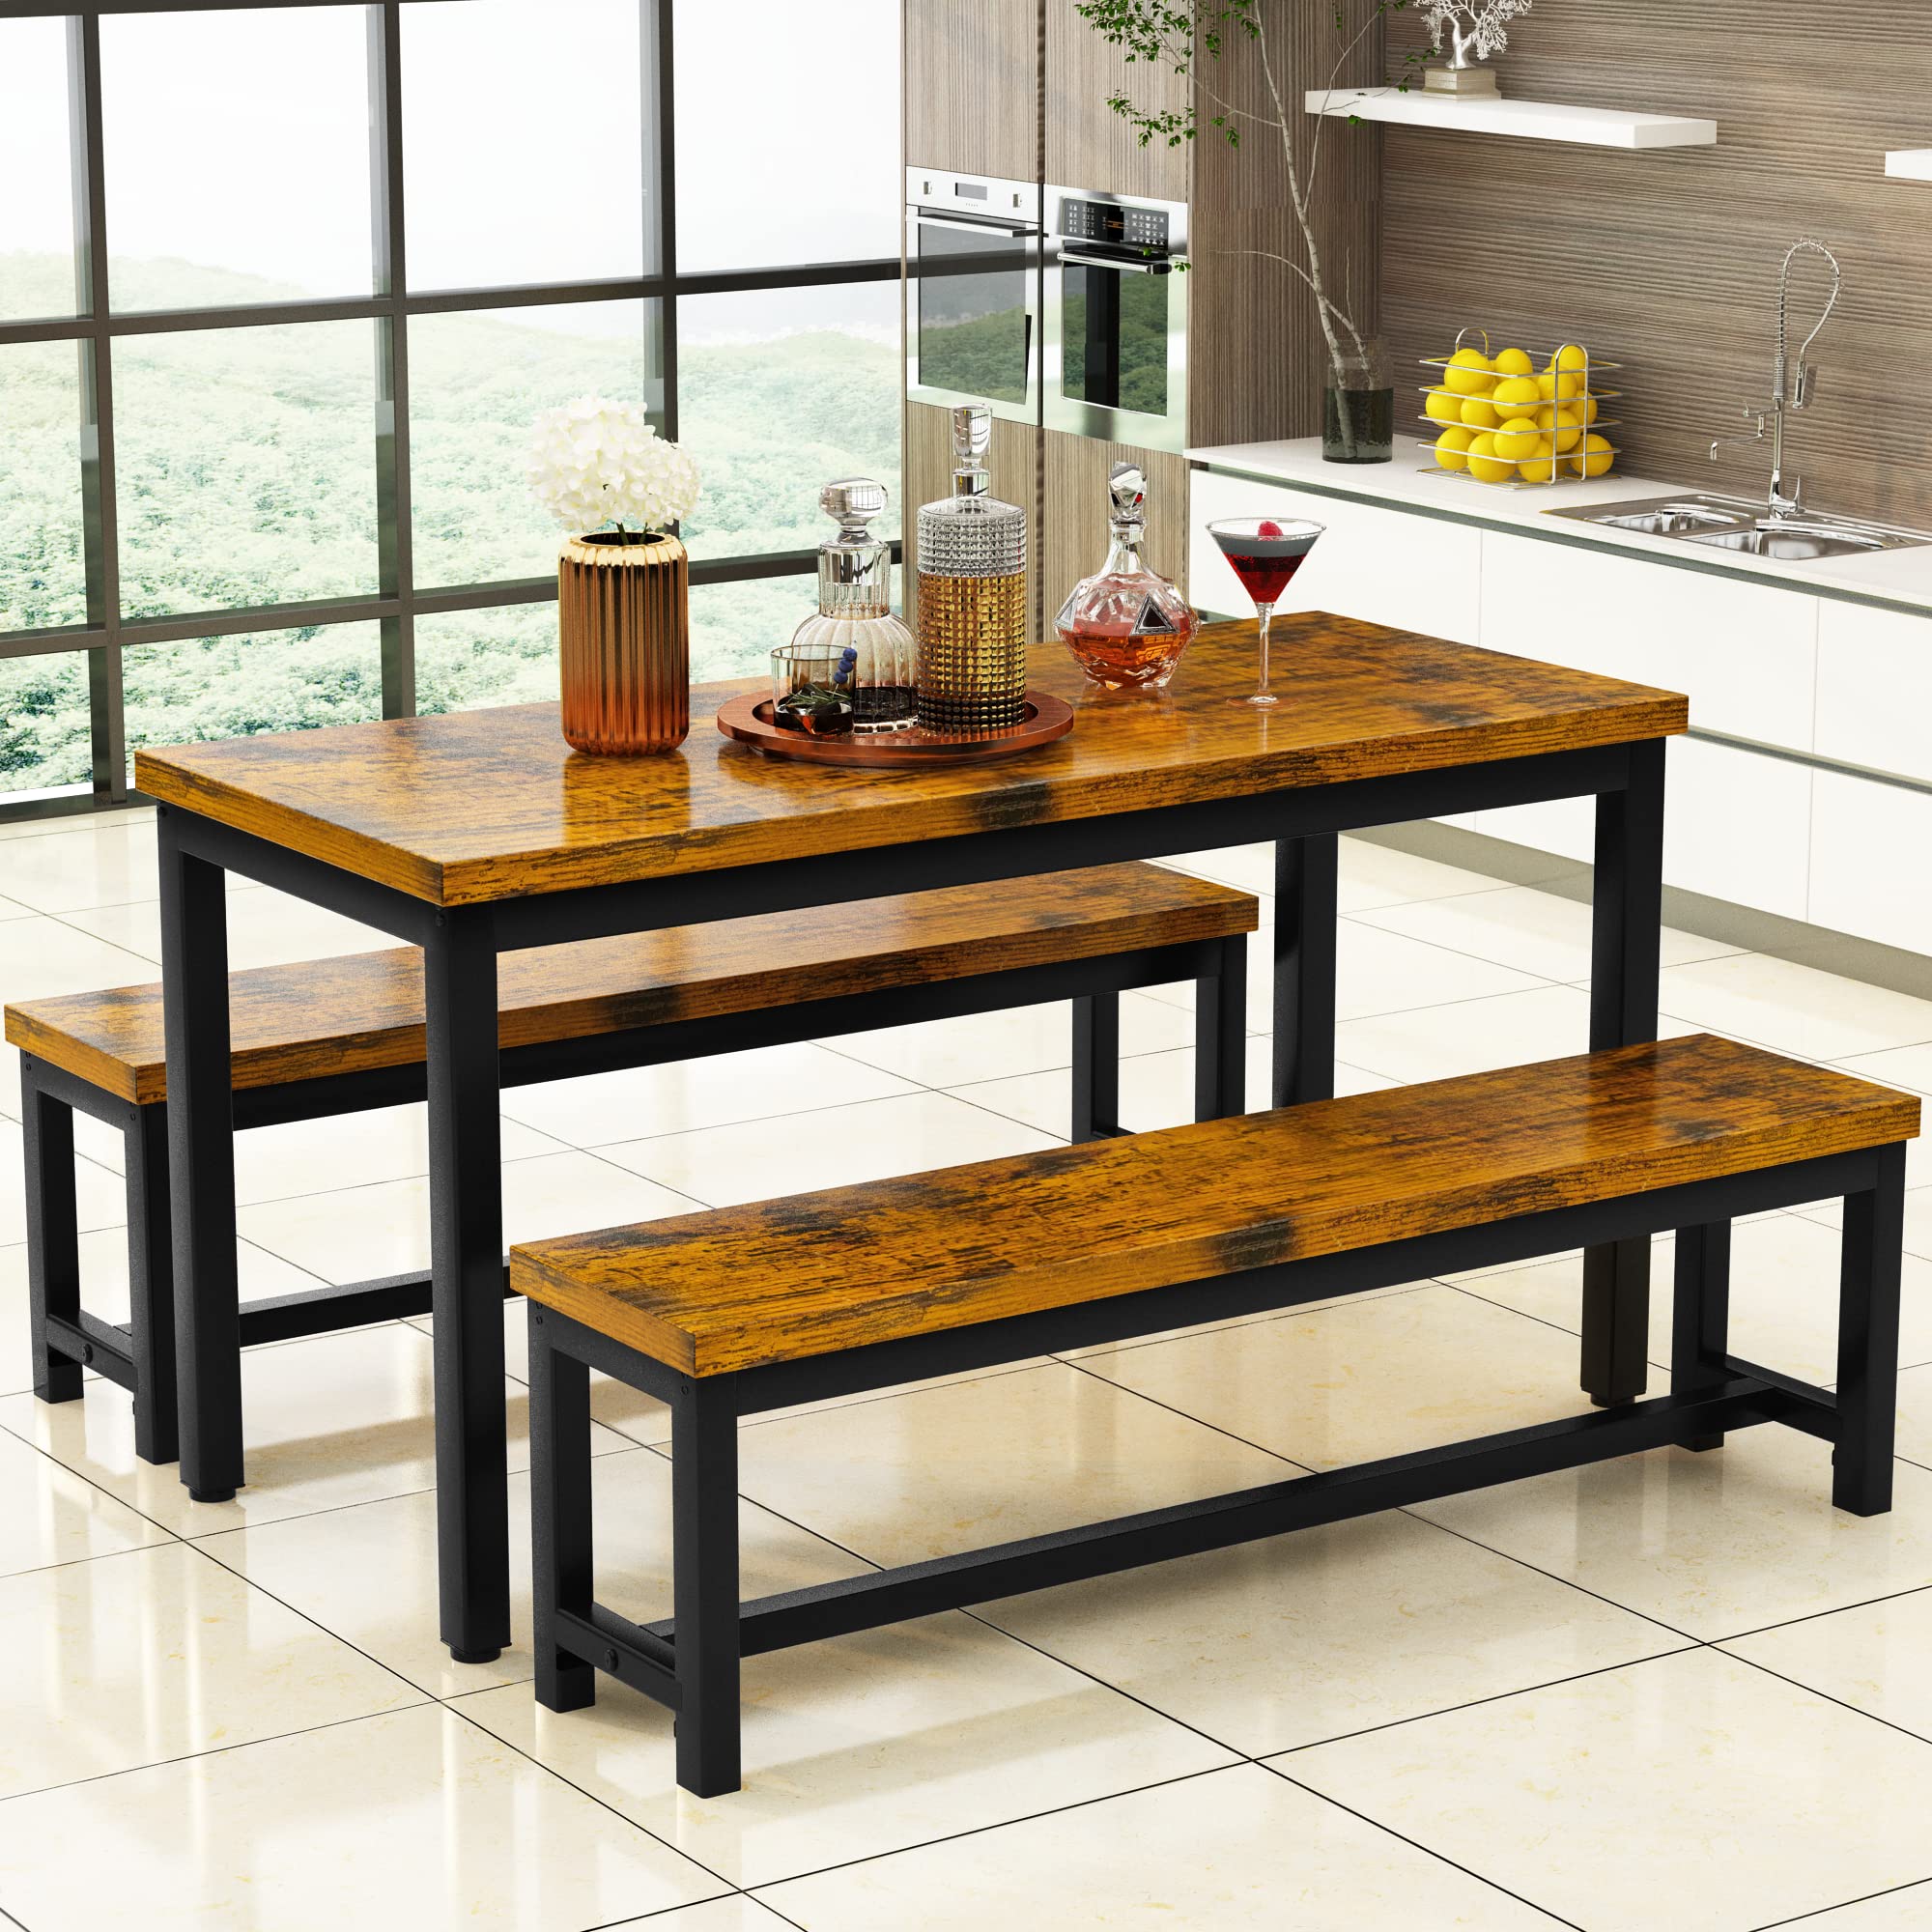 AWQM Dining Room Table Set, Kitchen Set with 2 Benches, Ideal for Home, and Room, Breakfast of 43.3x23.6x28.5 inches, Benches 38.5x11.8x17.5 Industrial Brown